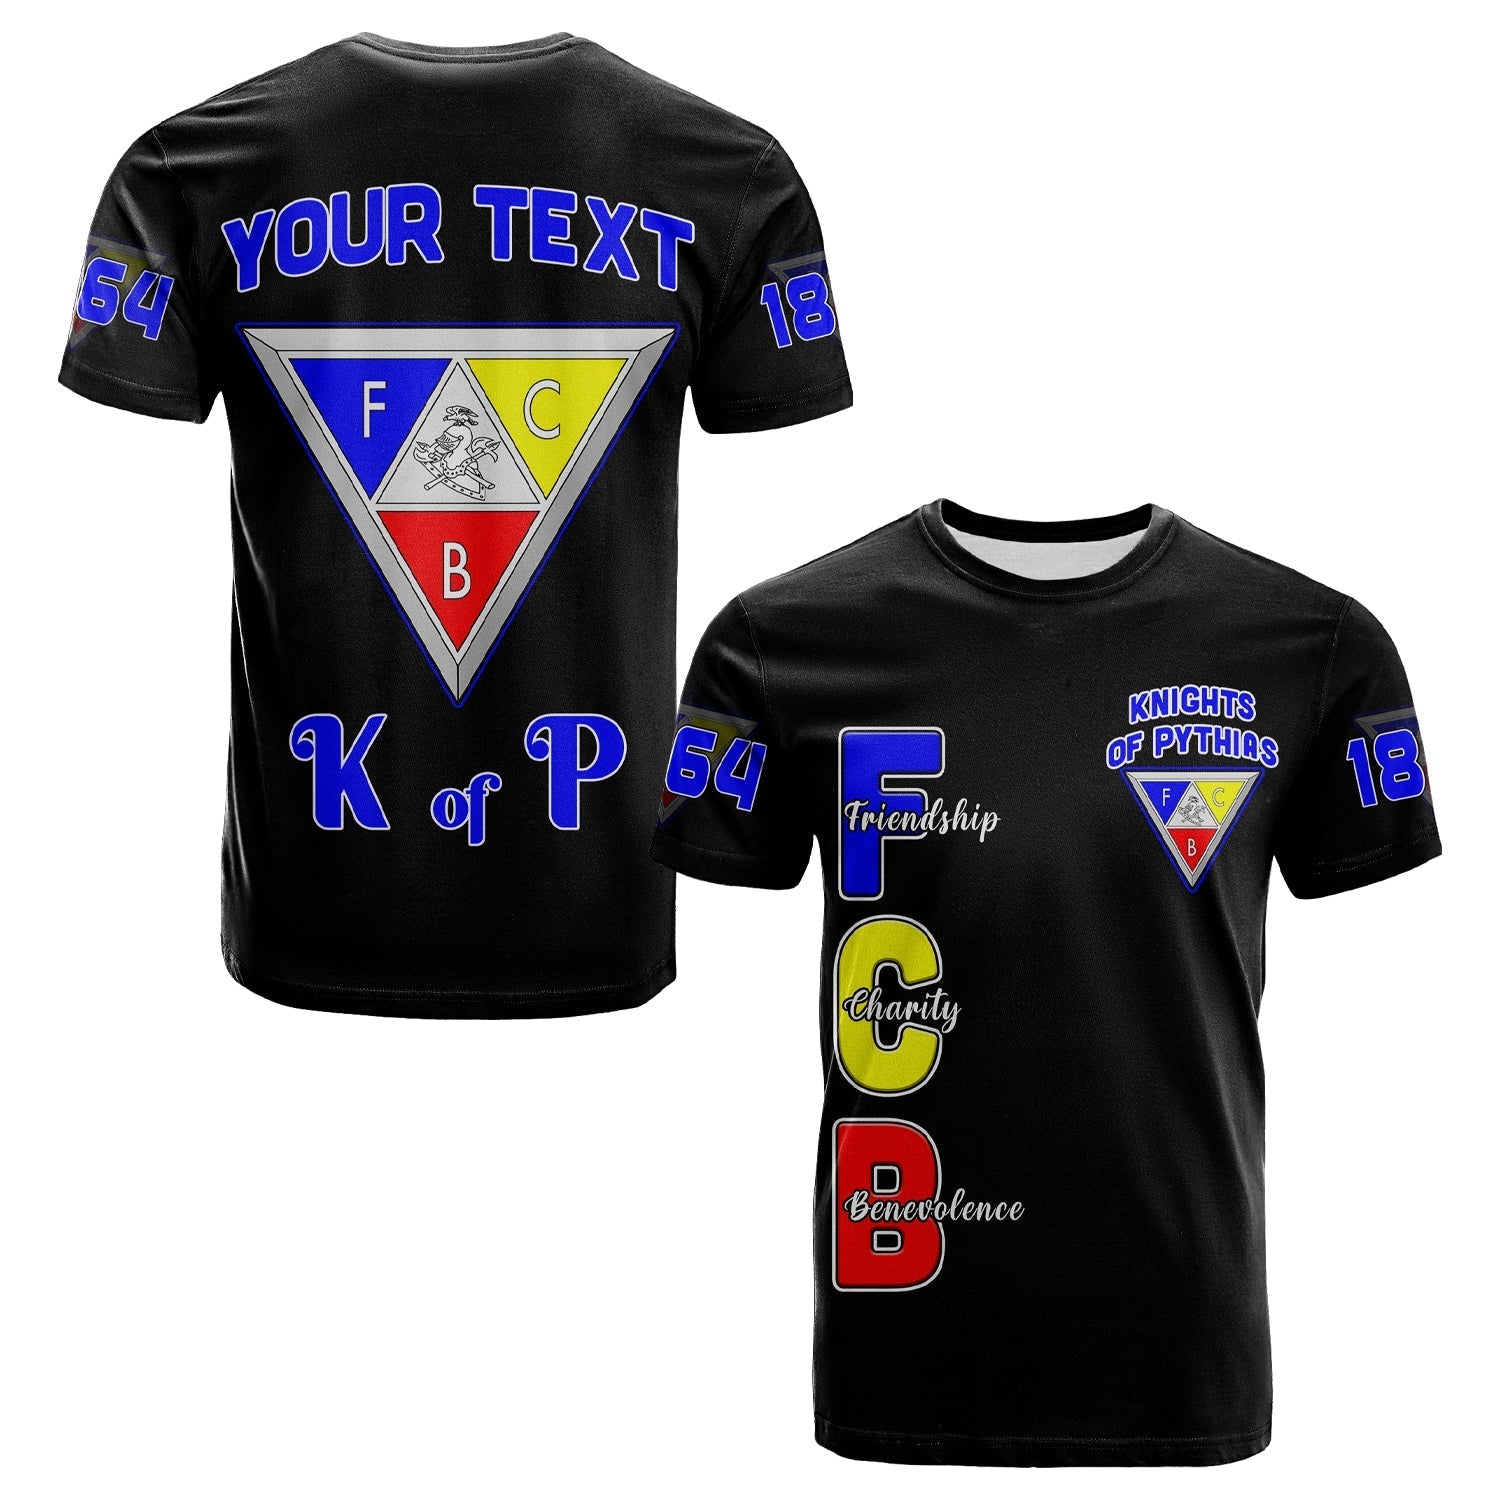 custom-personalise-knights-of-pythias-t-shirt-since-1864-simple-style